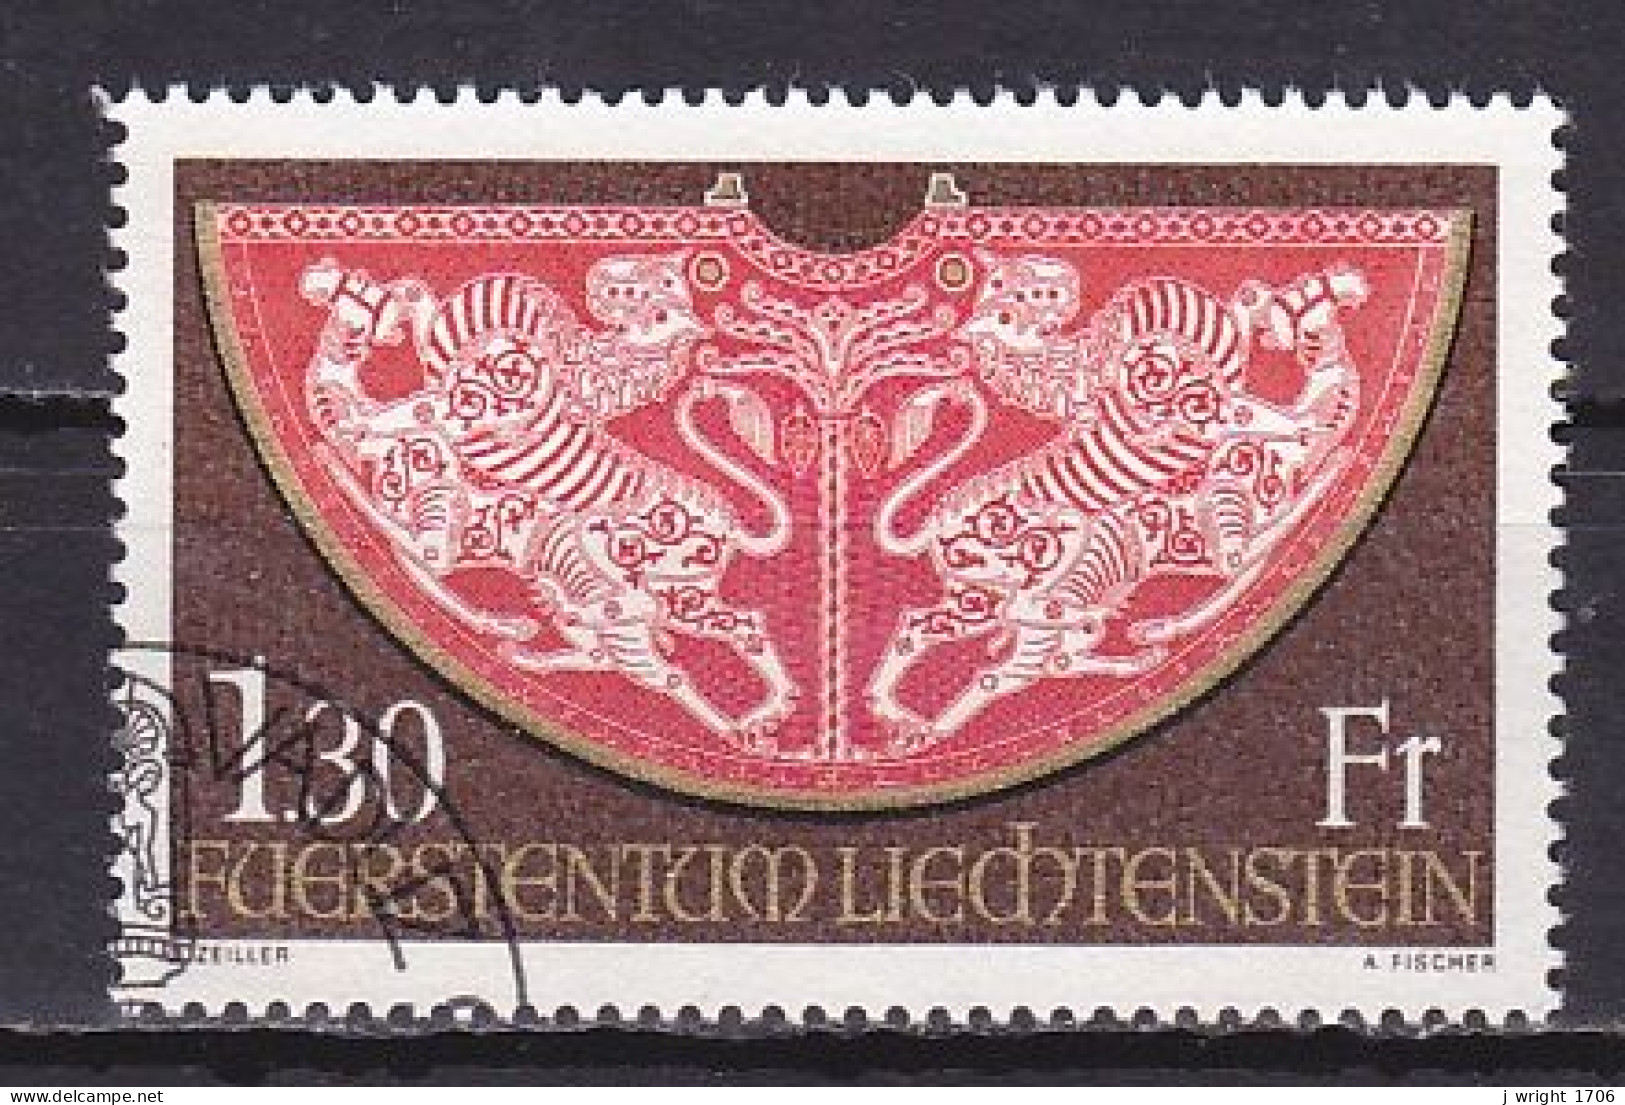 Liechtenstein, 1975, Imperial Insignia 2nd Series, 1.30Fr, CTO - Used Stamps